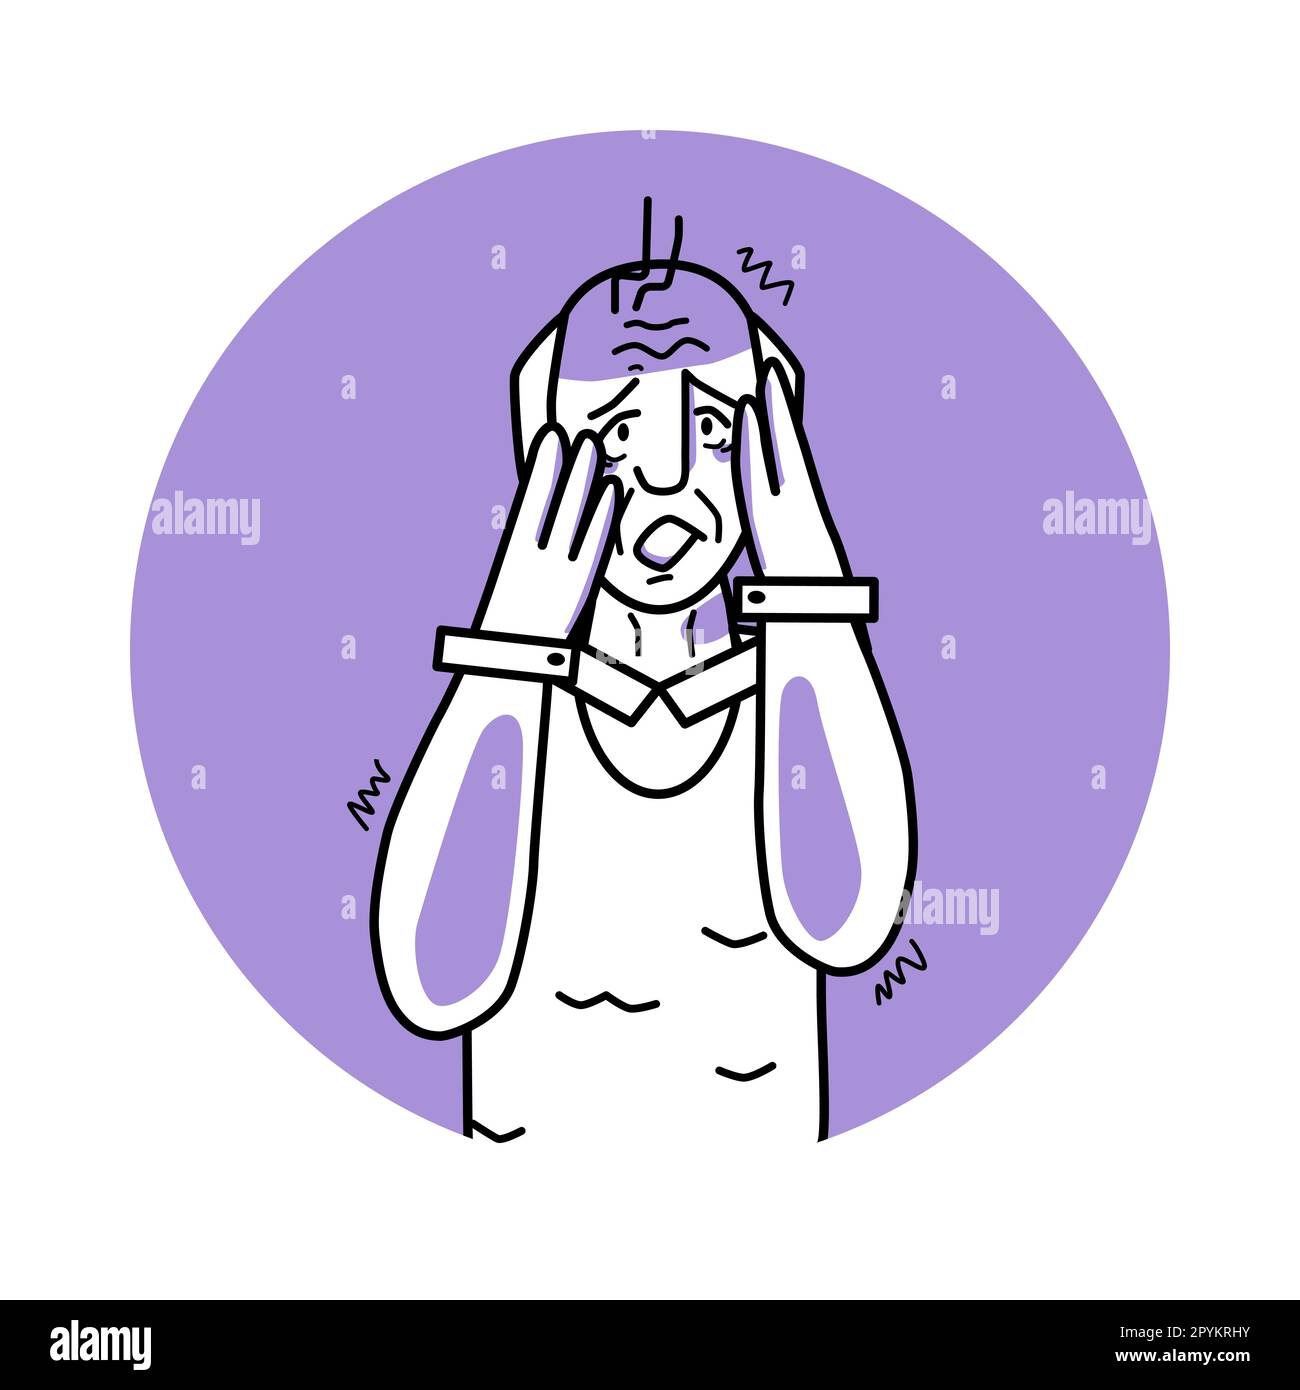 Frightened old man, emotion of fear, facial expression with gestures. Afraid grandfather with white hair, expressing her panic feelings. Purple vector Stock Vector